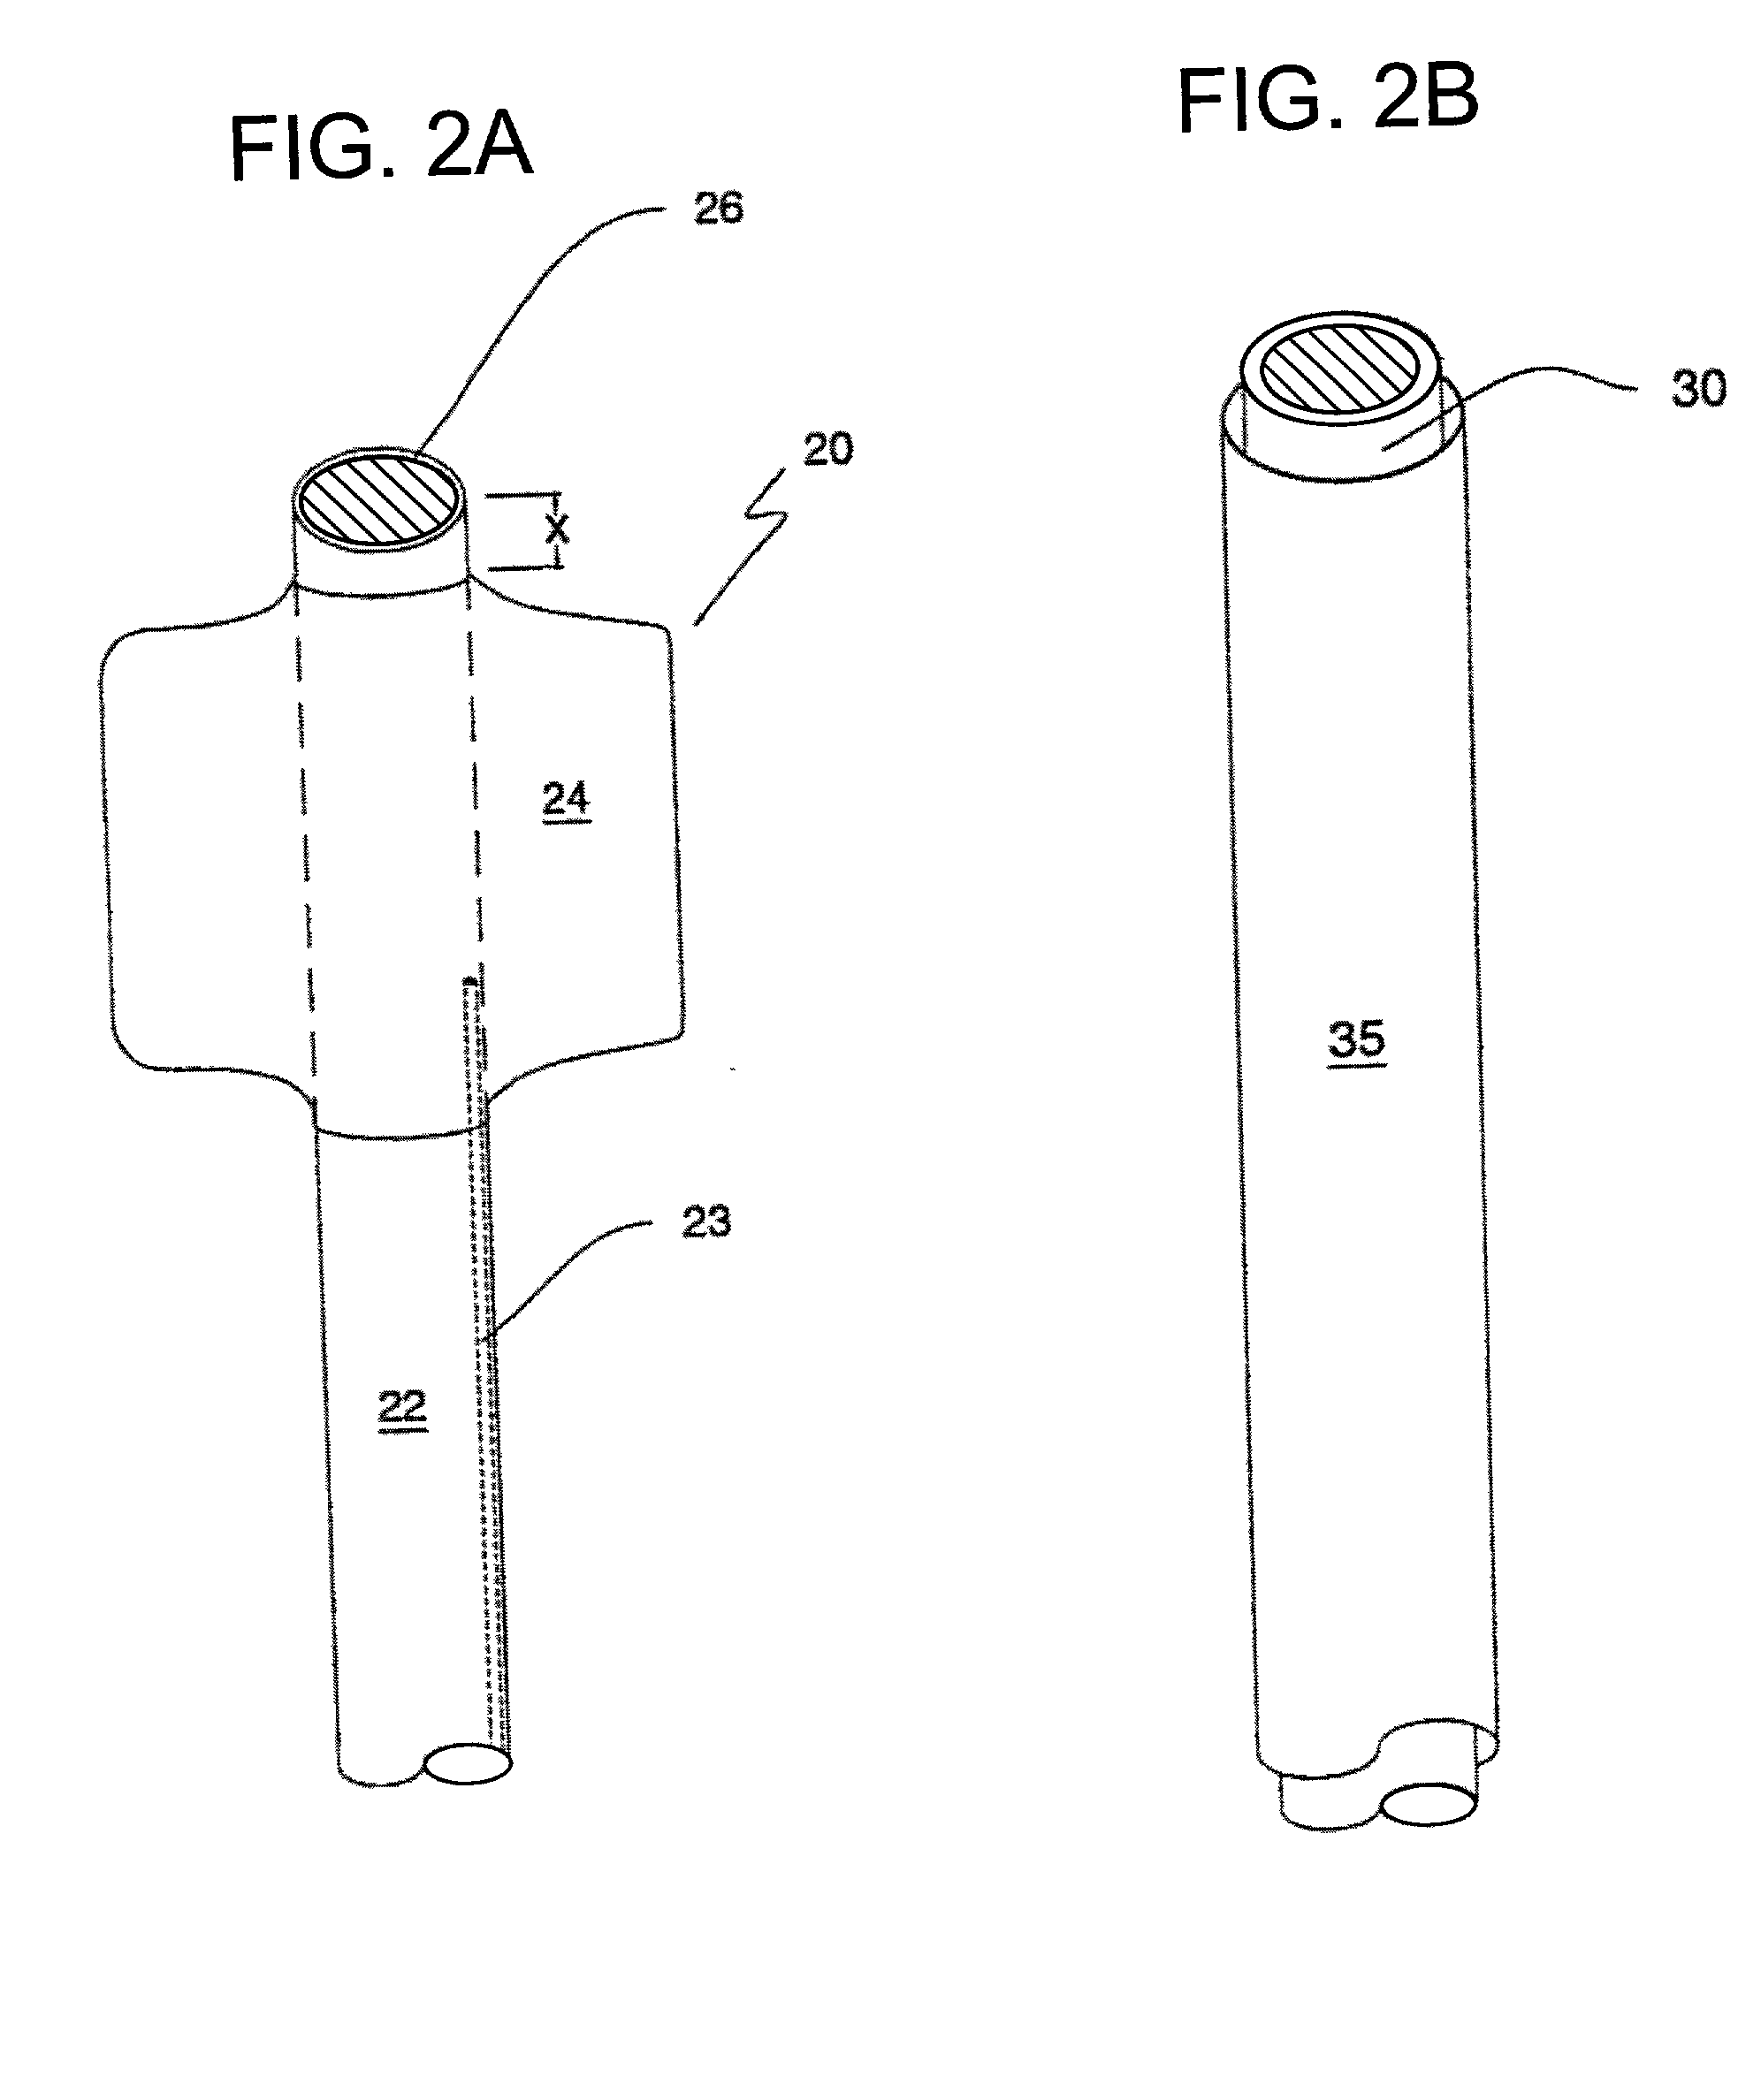 Catheter devices and methods for their use in the treatment of calcified vascular occlusions